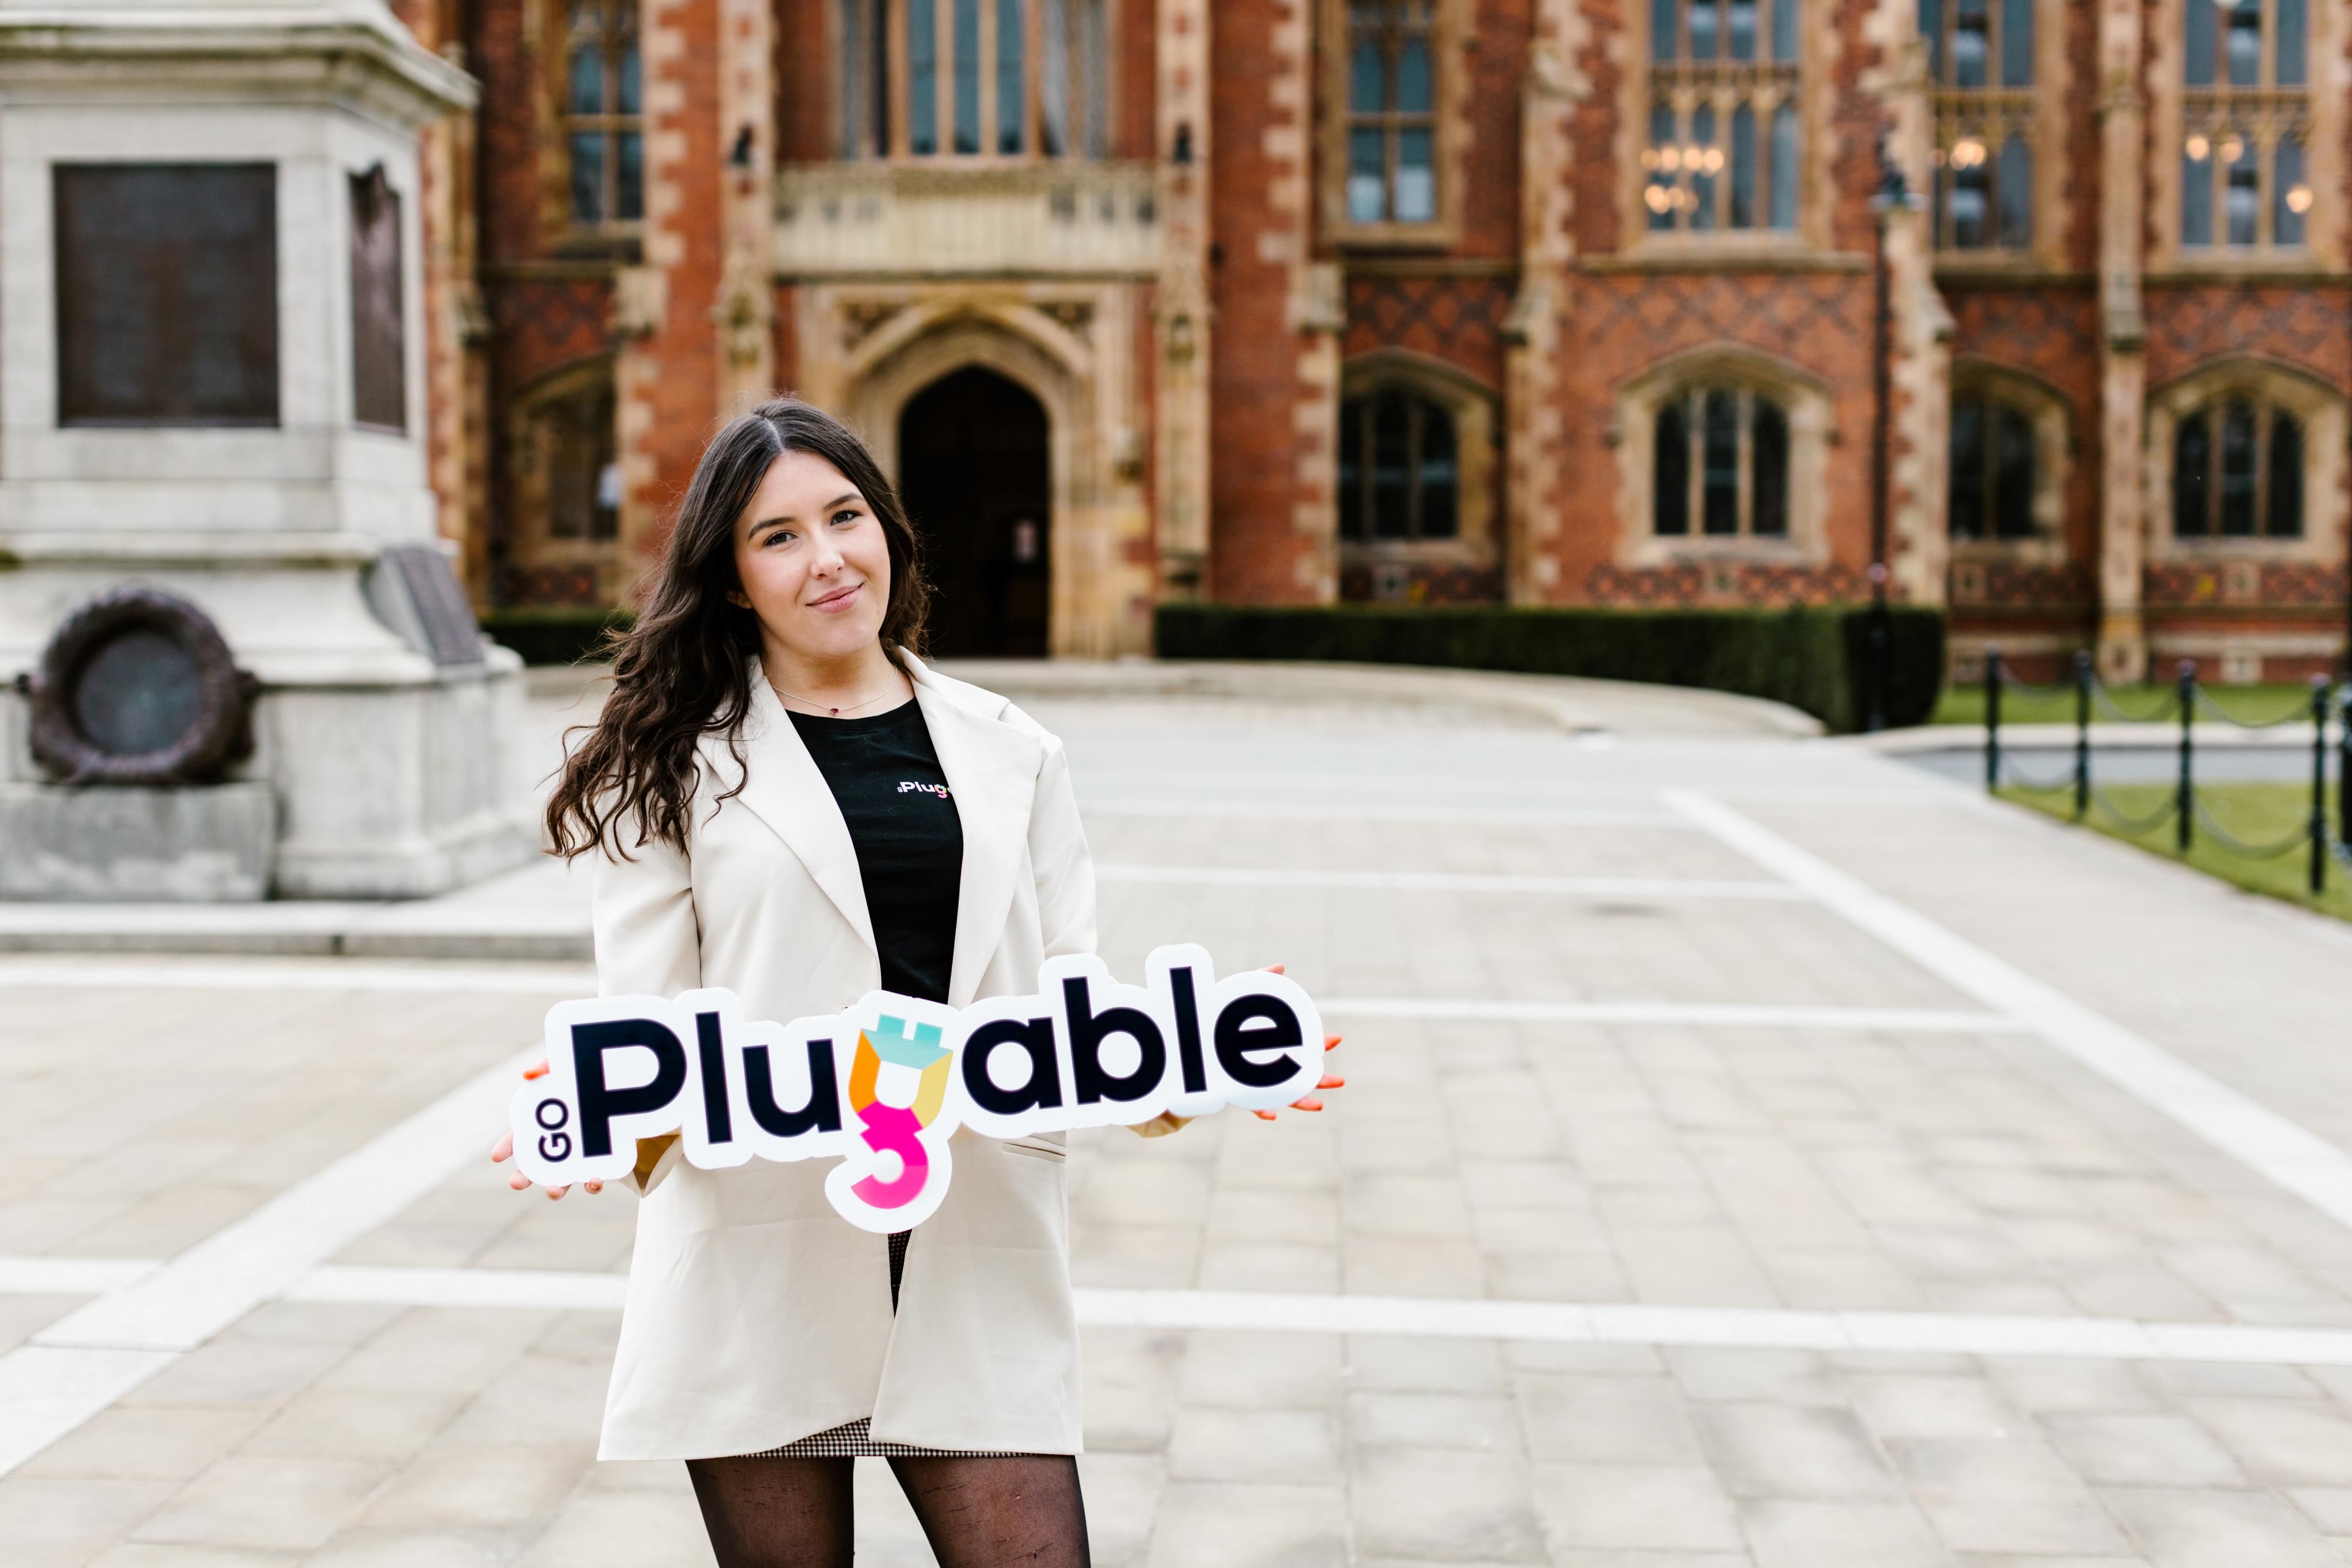 ON THE UP: 23-year-old Maebh Reynolds from Turf Lodge founded her own business GoPlugable this year